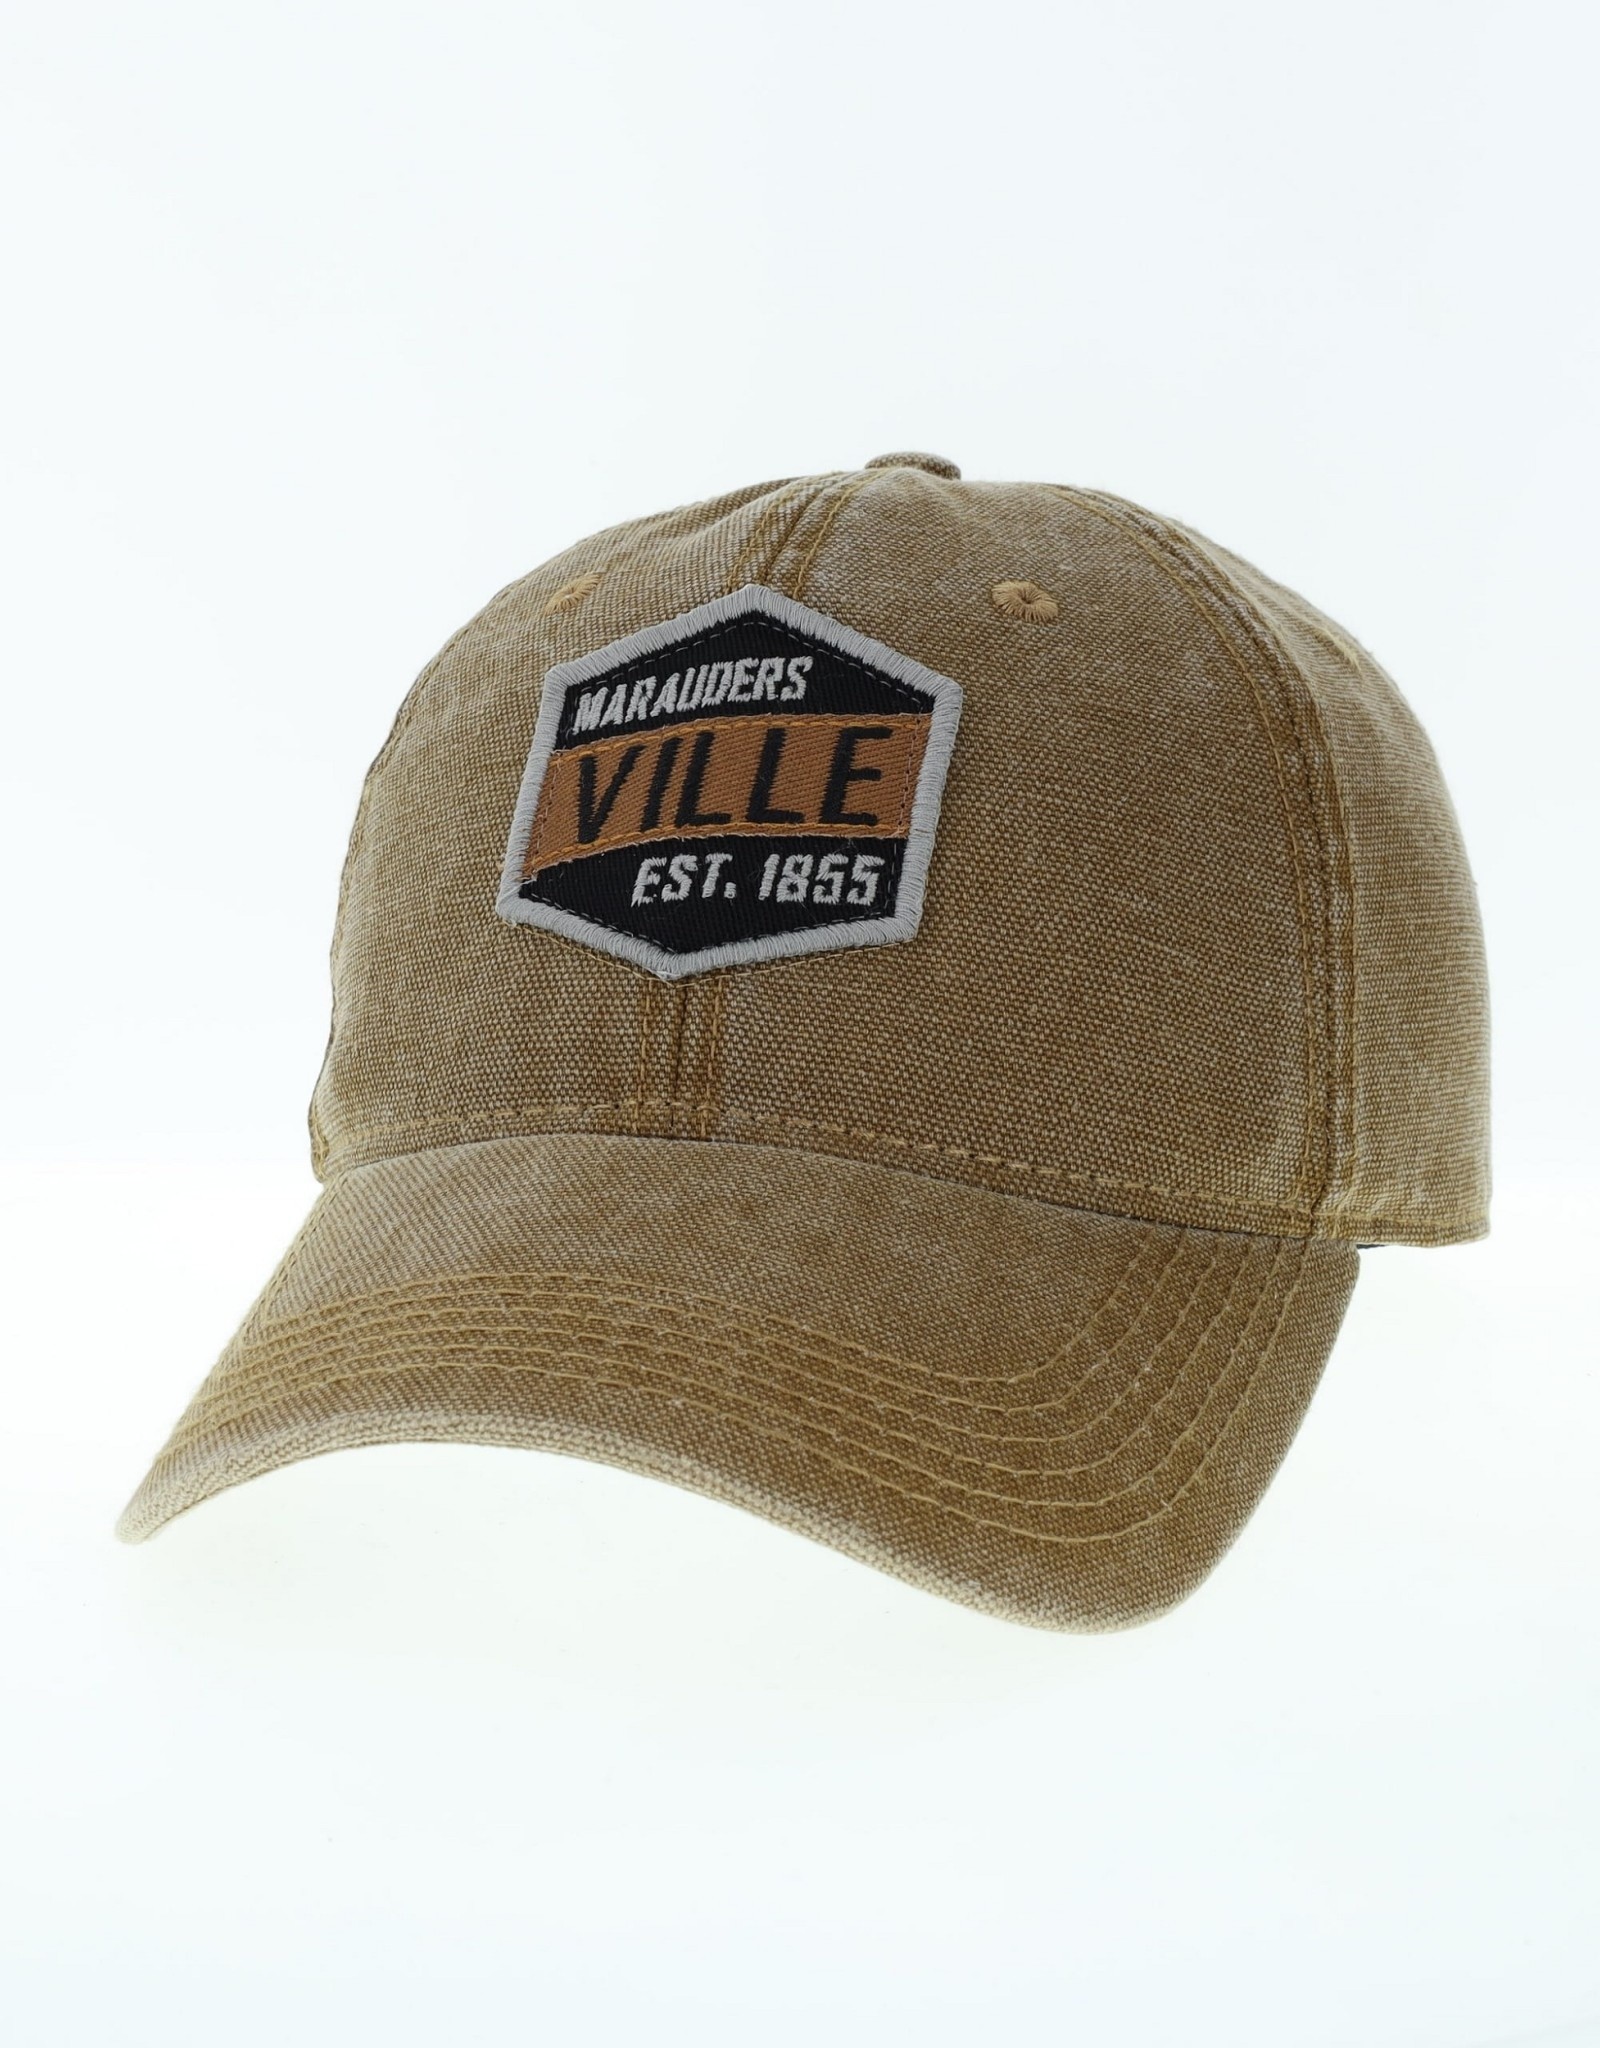 Camel Dashboard Adjustable Cap with The "Ville" Patch